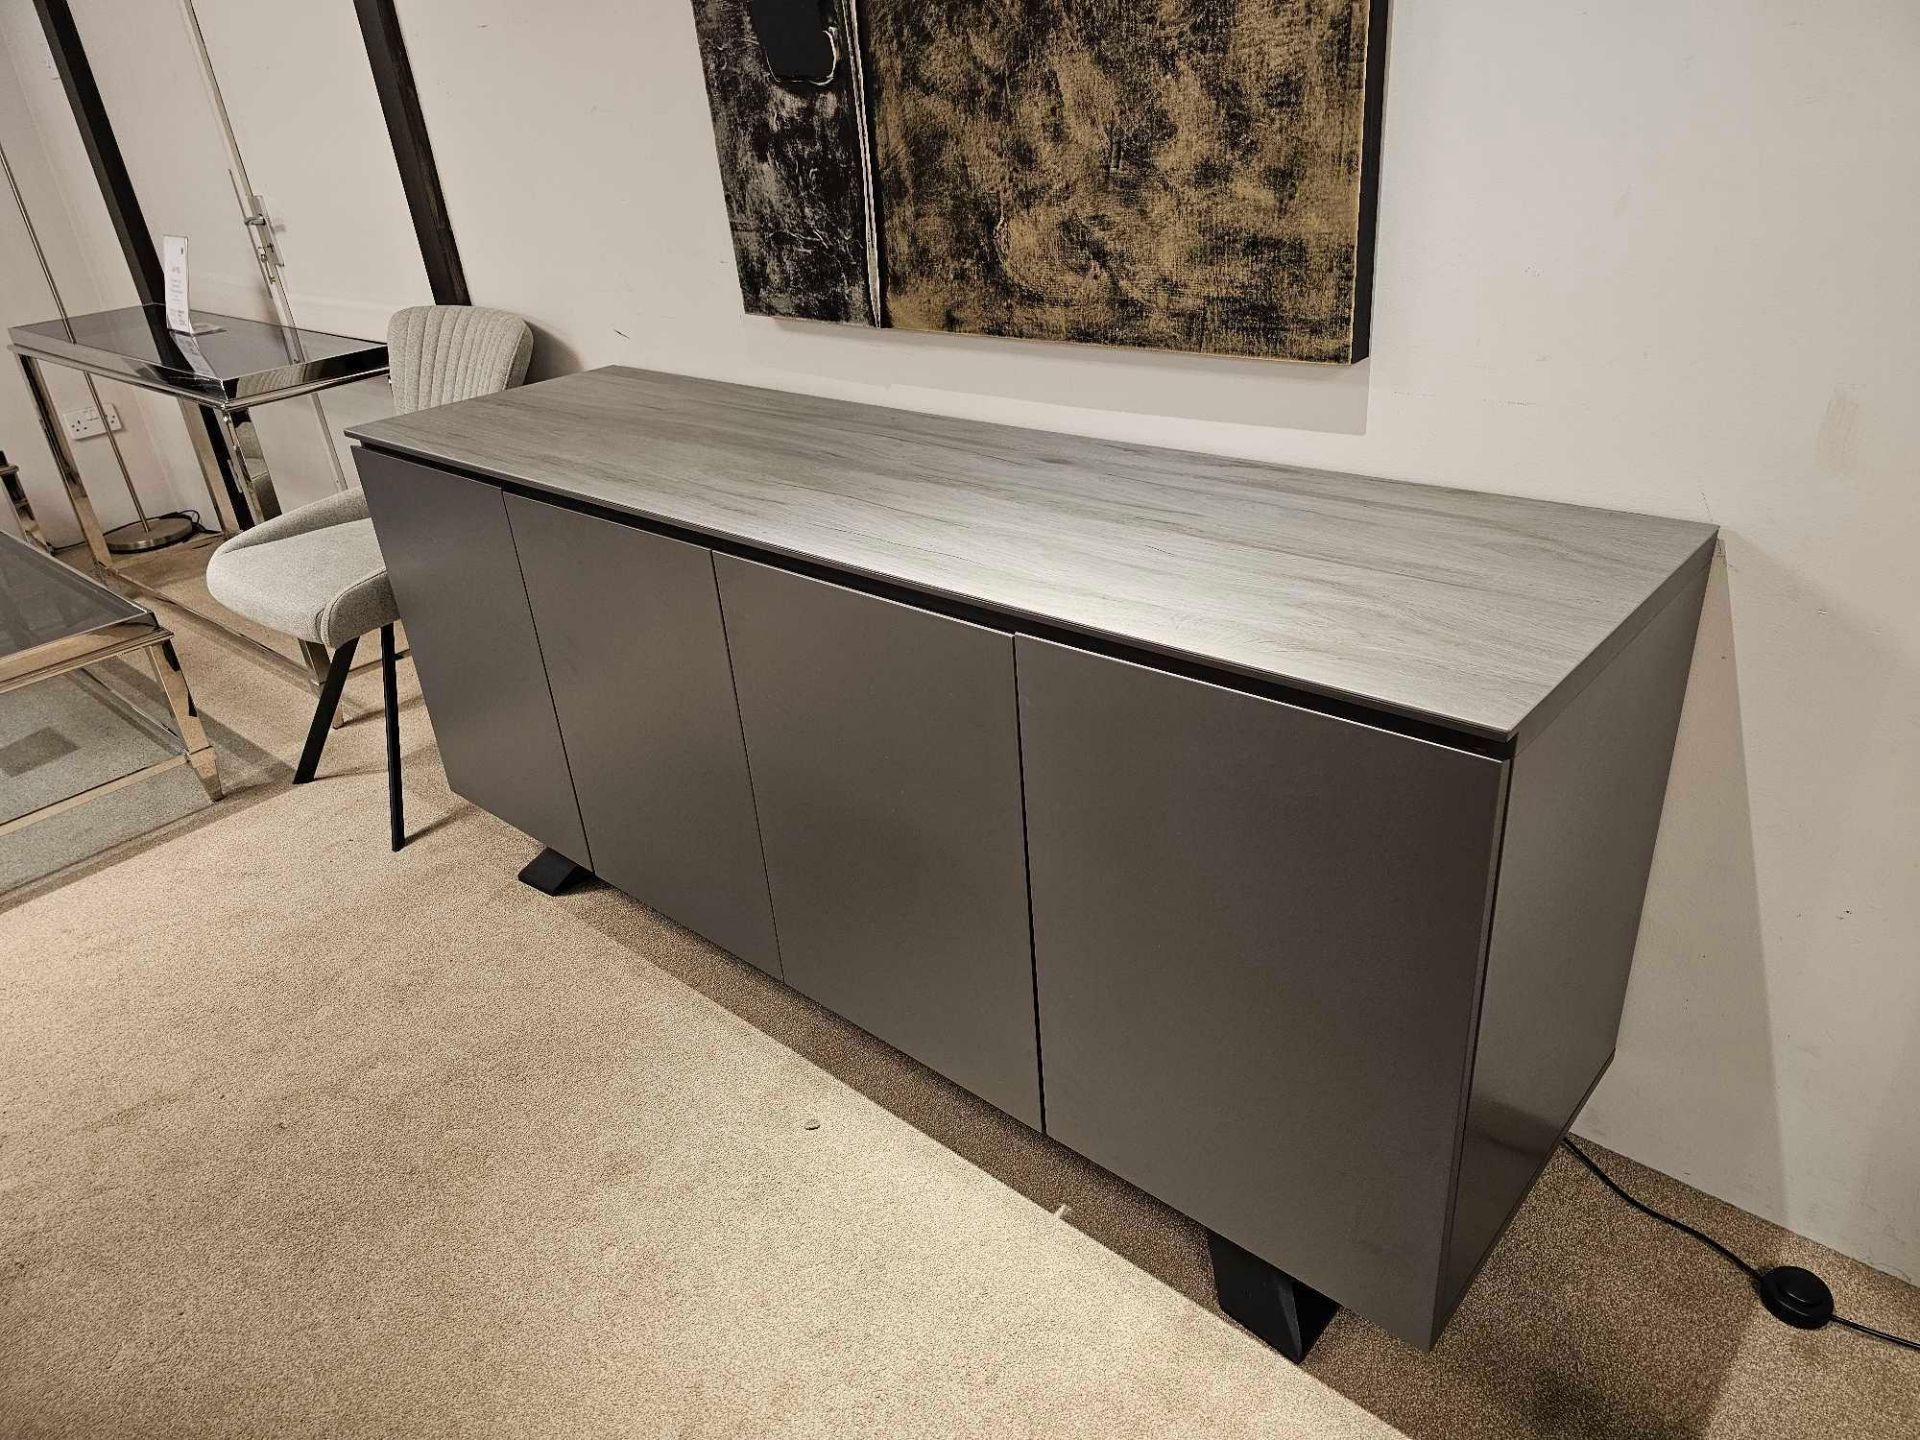 Spartan Sideboard by Kesterport The Spartan Four Door Sideboard provides is striking as a stand - Image 7 of 8